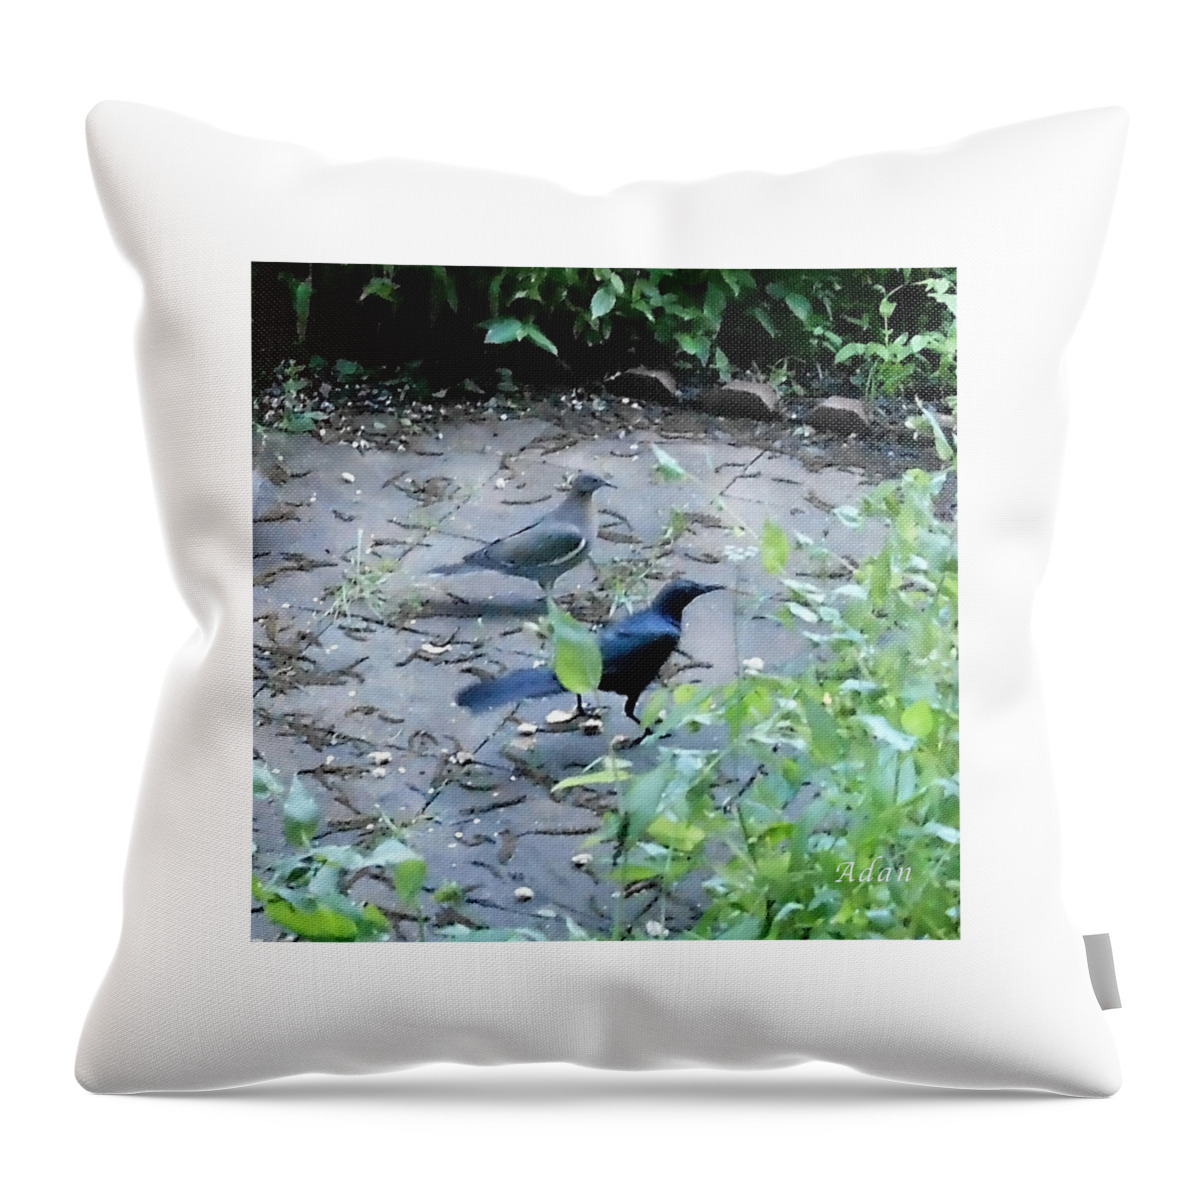 Two Birds Throw Pillow featuring the photograph Two Birds by Felipe Adan Lerma